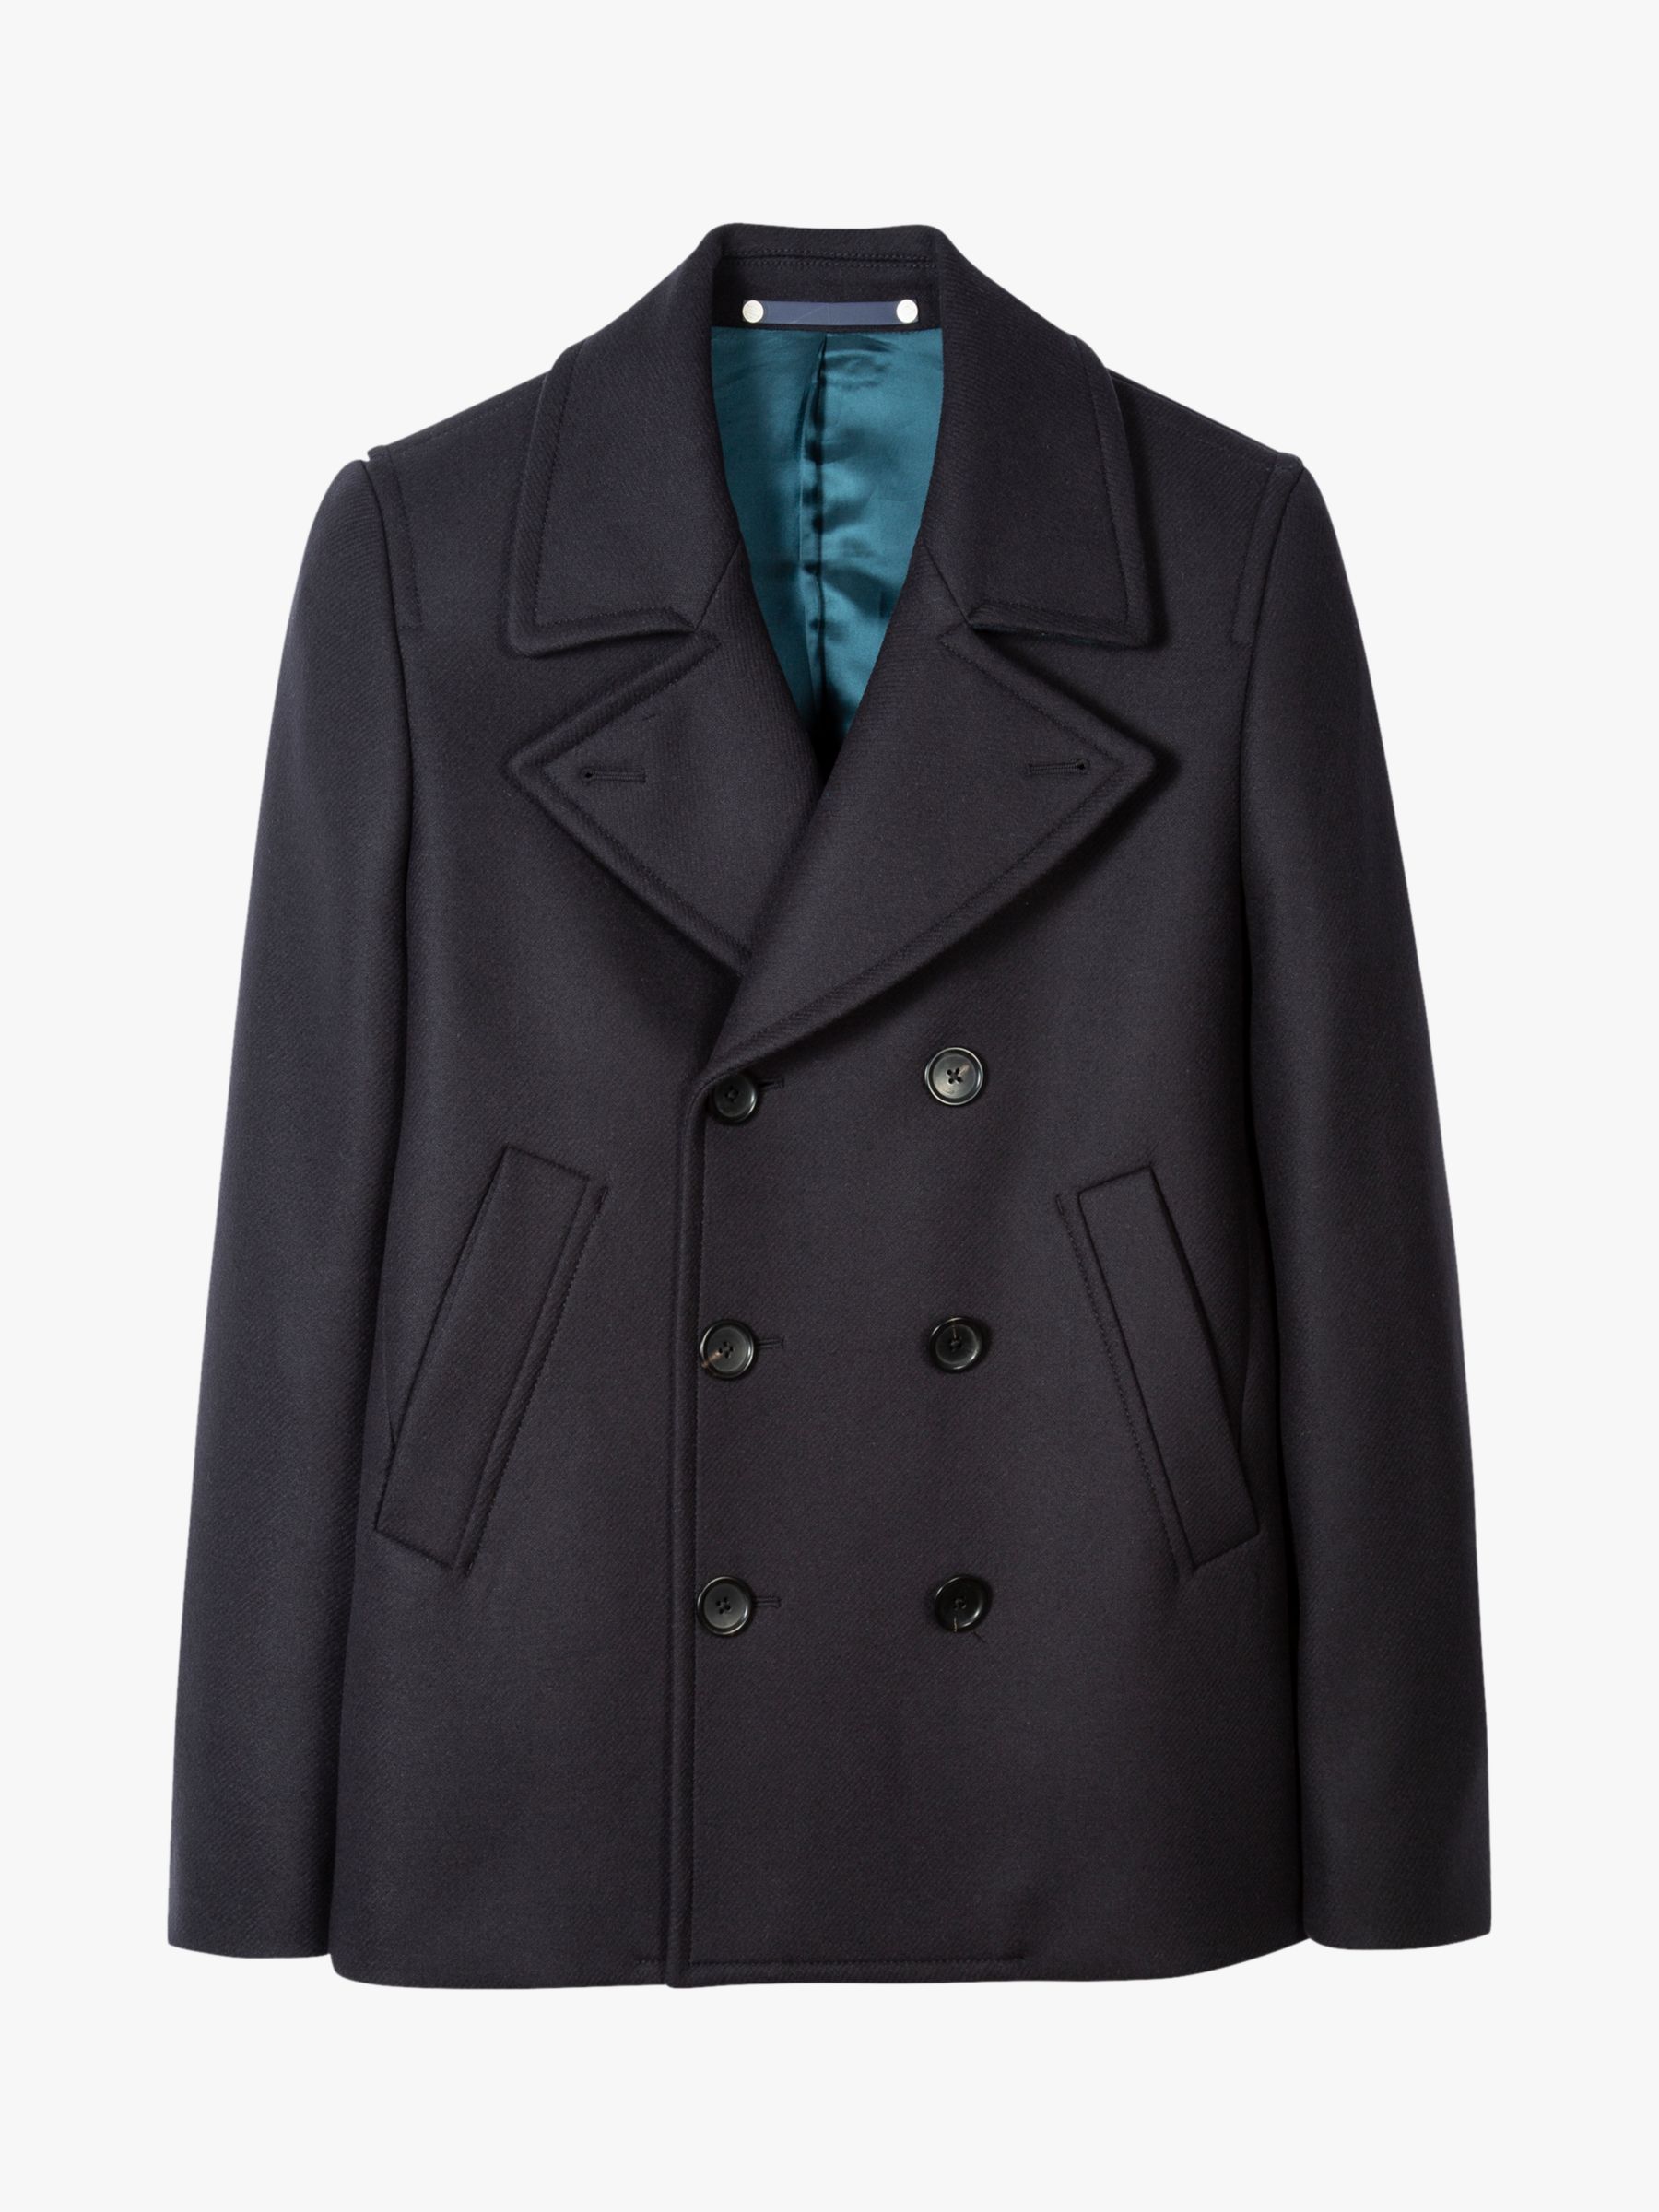 Paul Smith Wool Cashmere Peacoat, Navy at John Lewis & Partners